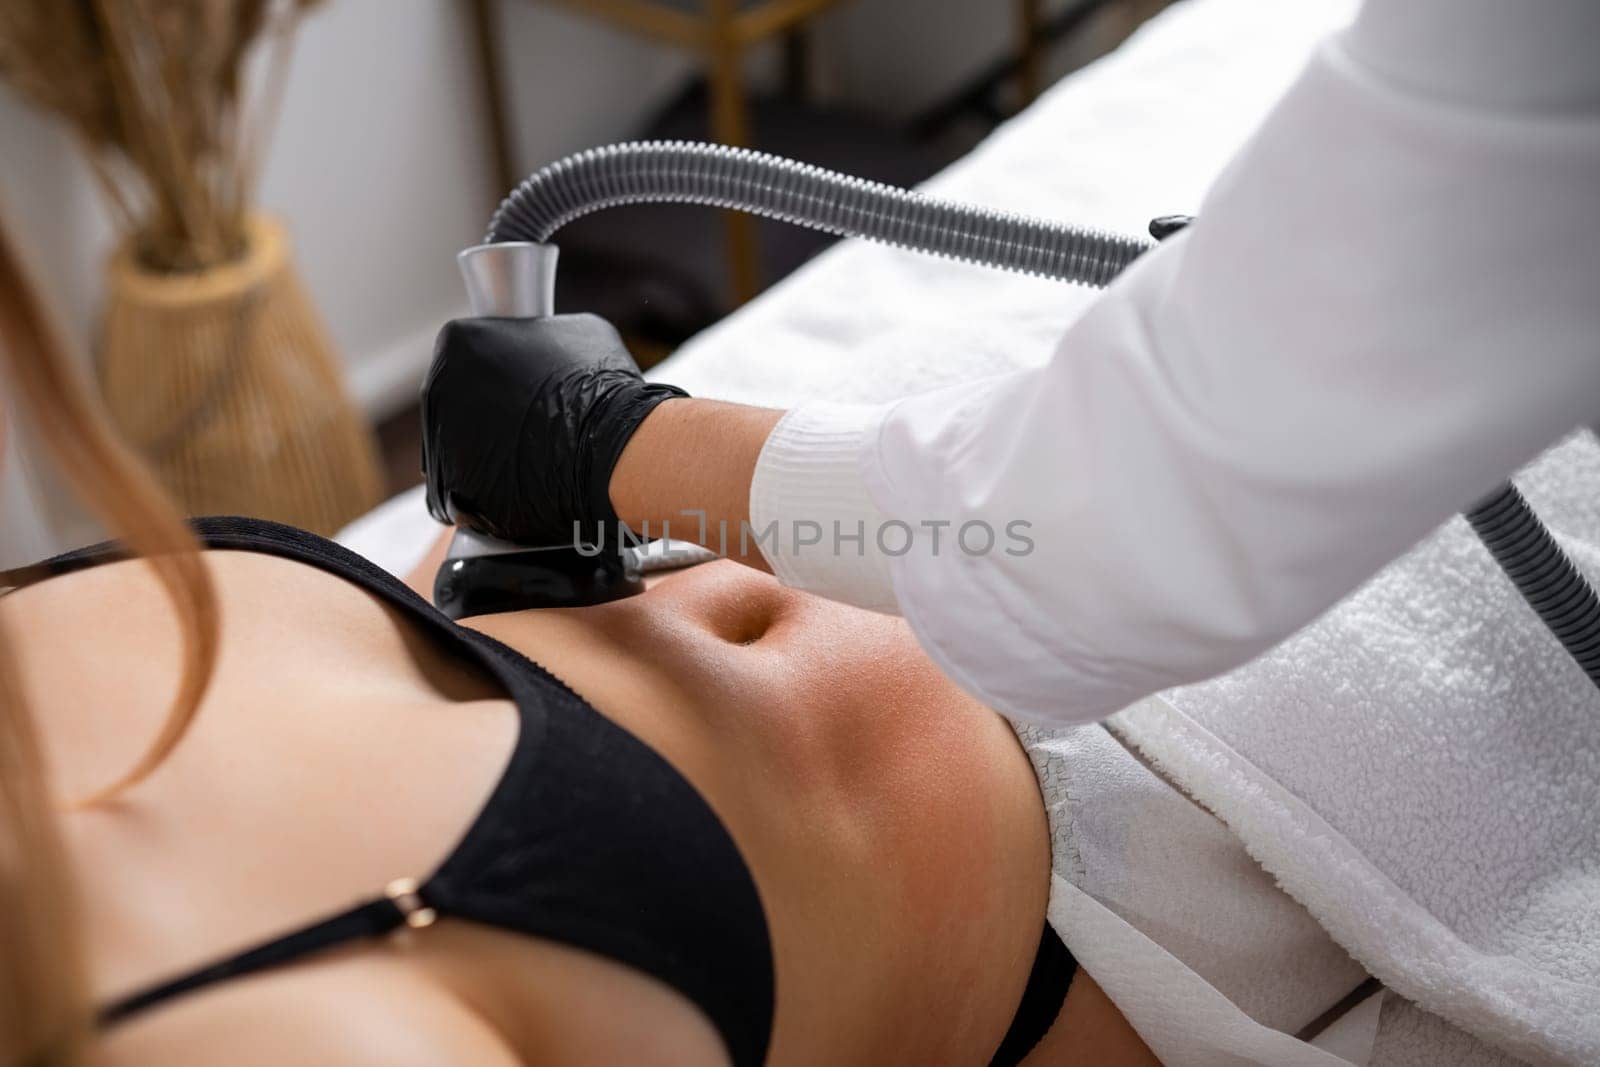 Client opts for cavitation therapy to diminish fat on belly. Ultrasonic procedure stimulates collagen production contributing to smoother skin